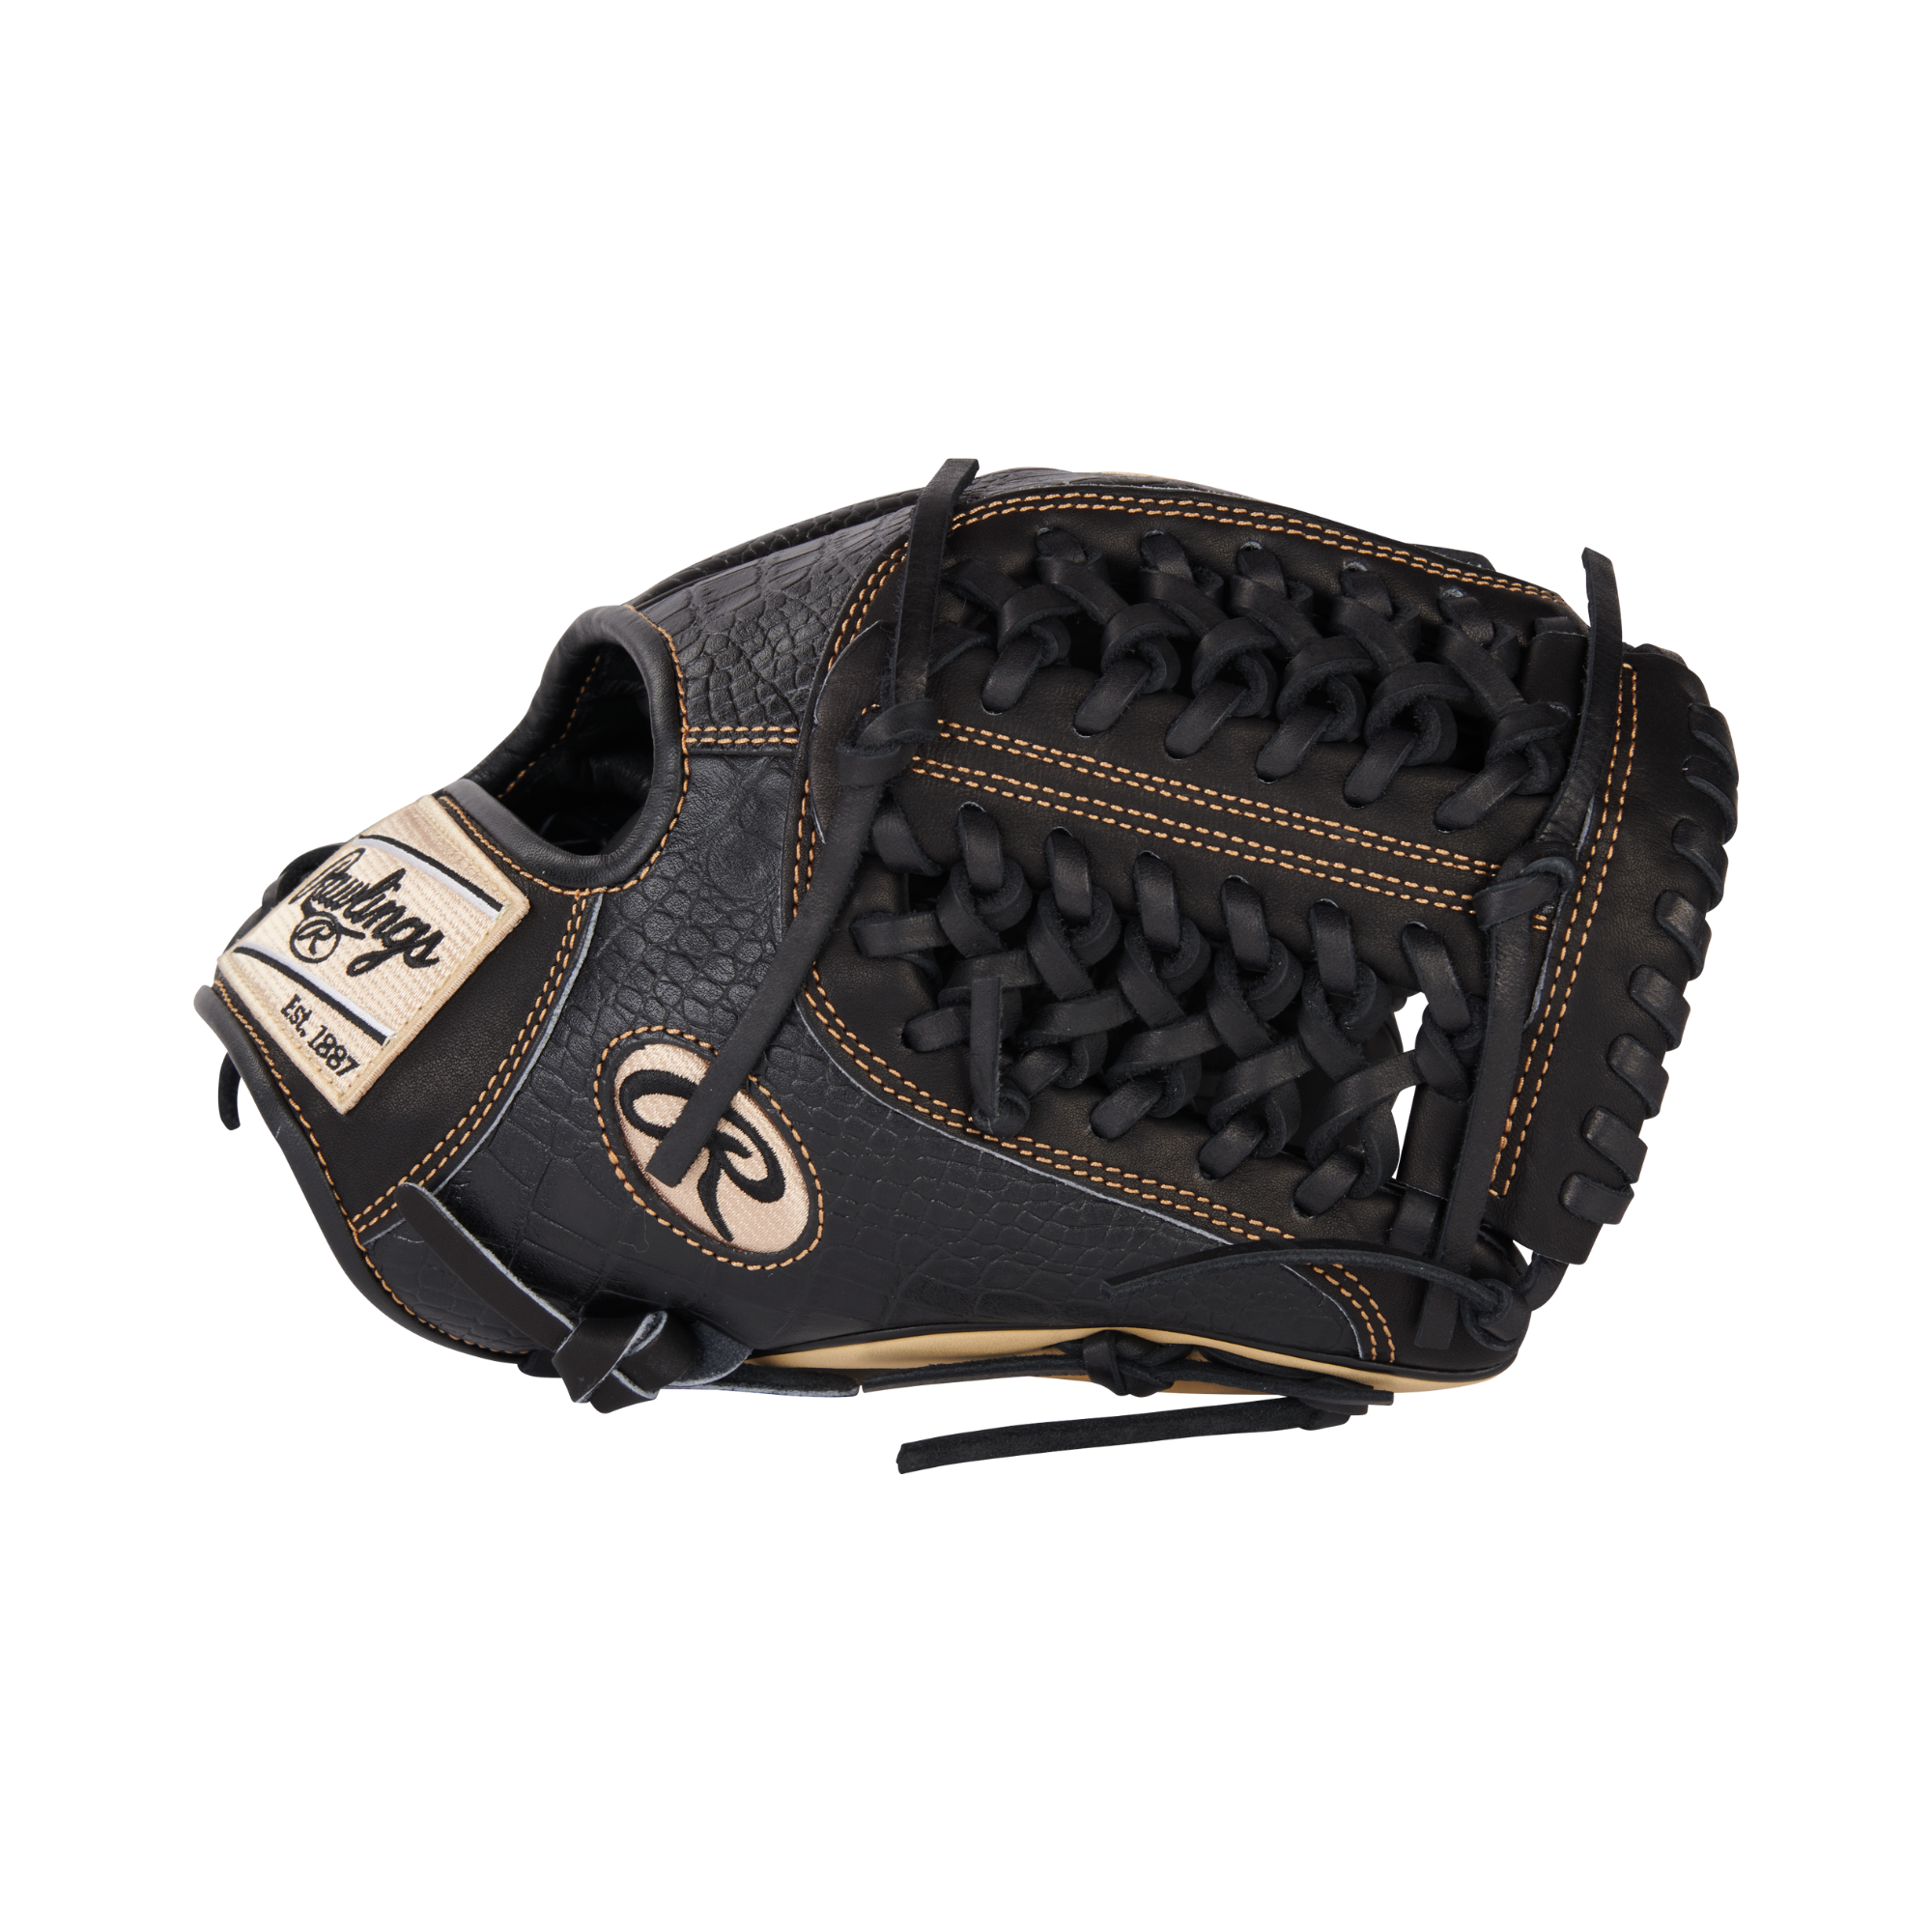 Rawlings Heart of the Hide R2G Series P/INF CONV/MOD TRAP Narrow Fit 11.75"